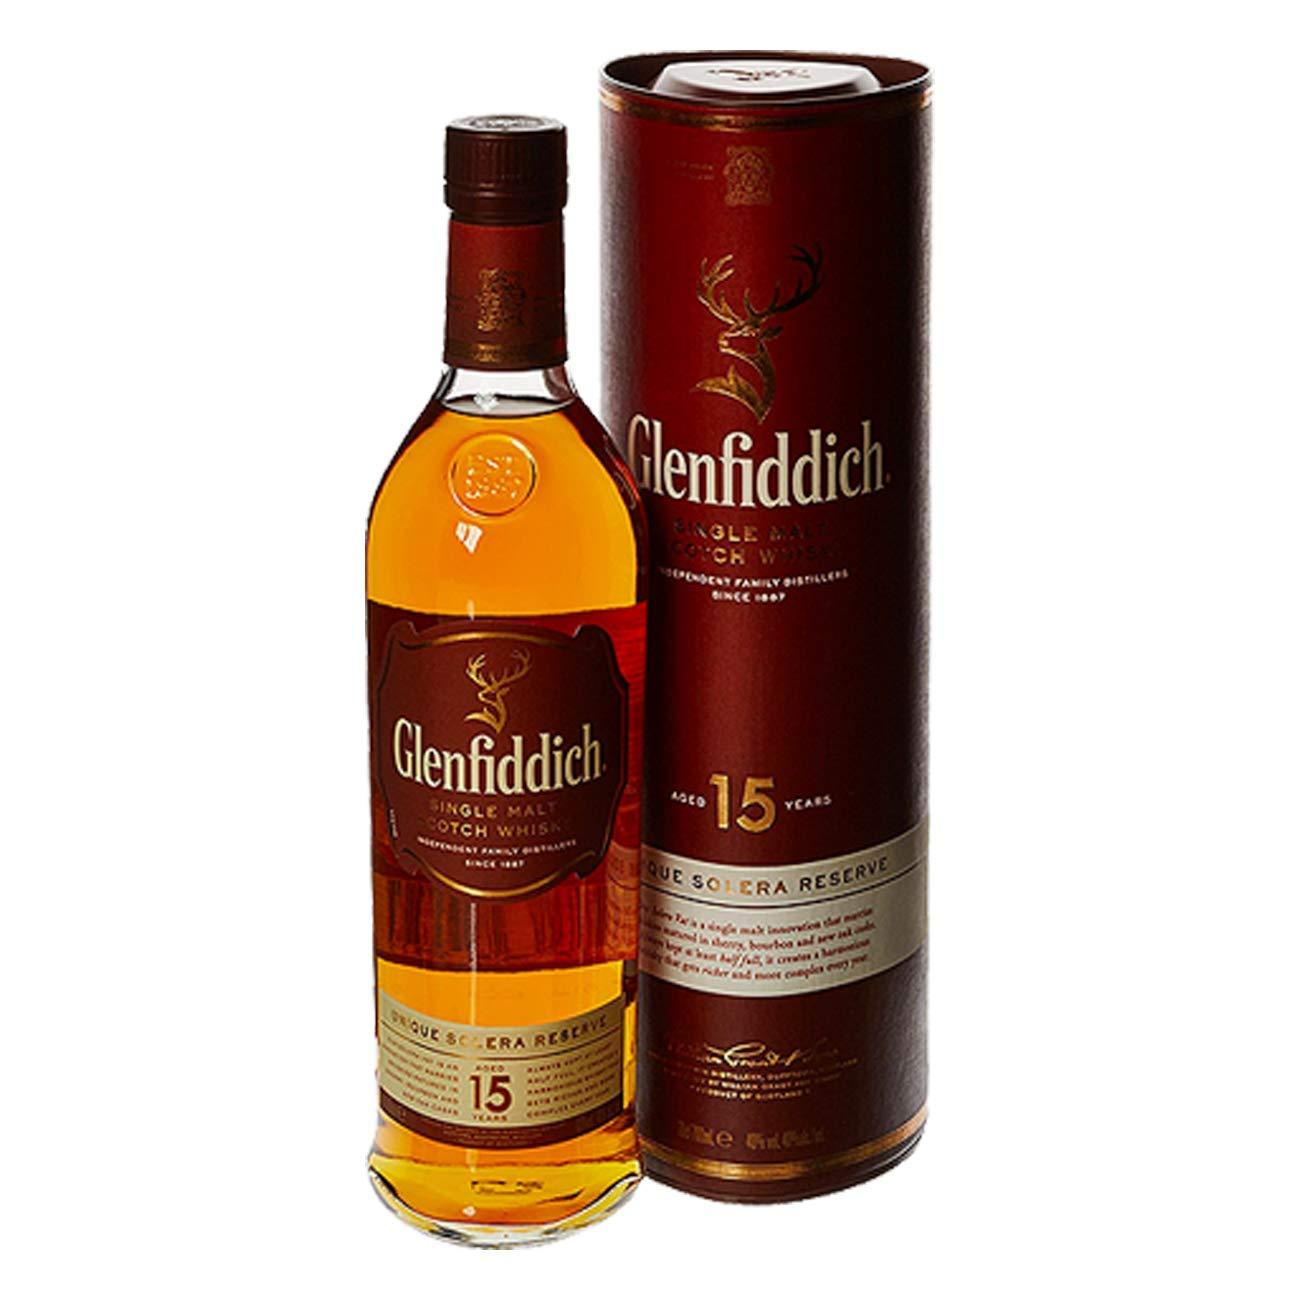 Glenfiddich Year Old Scotch Whisky, cl Amazoncouk Grocery